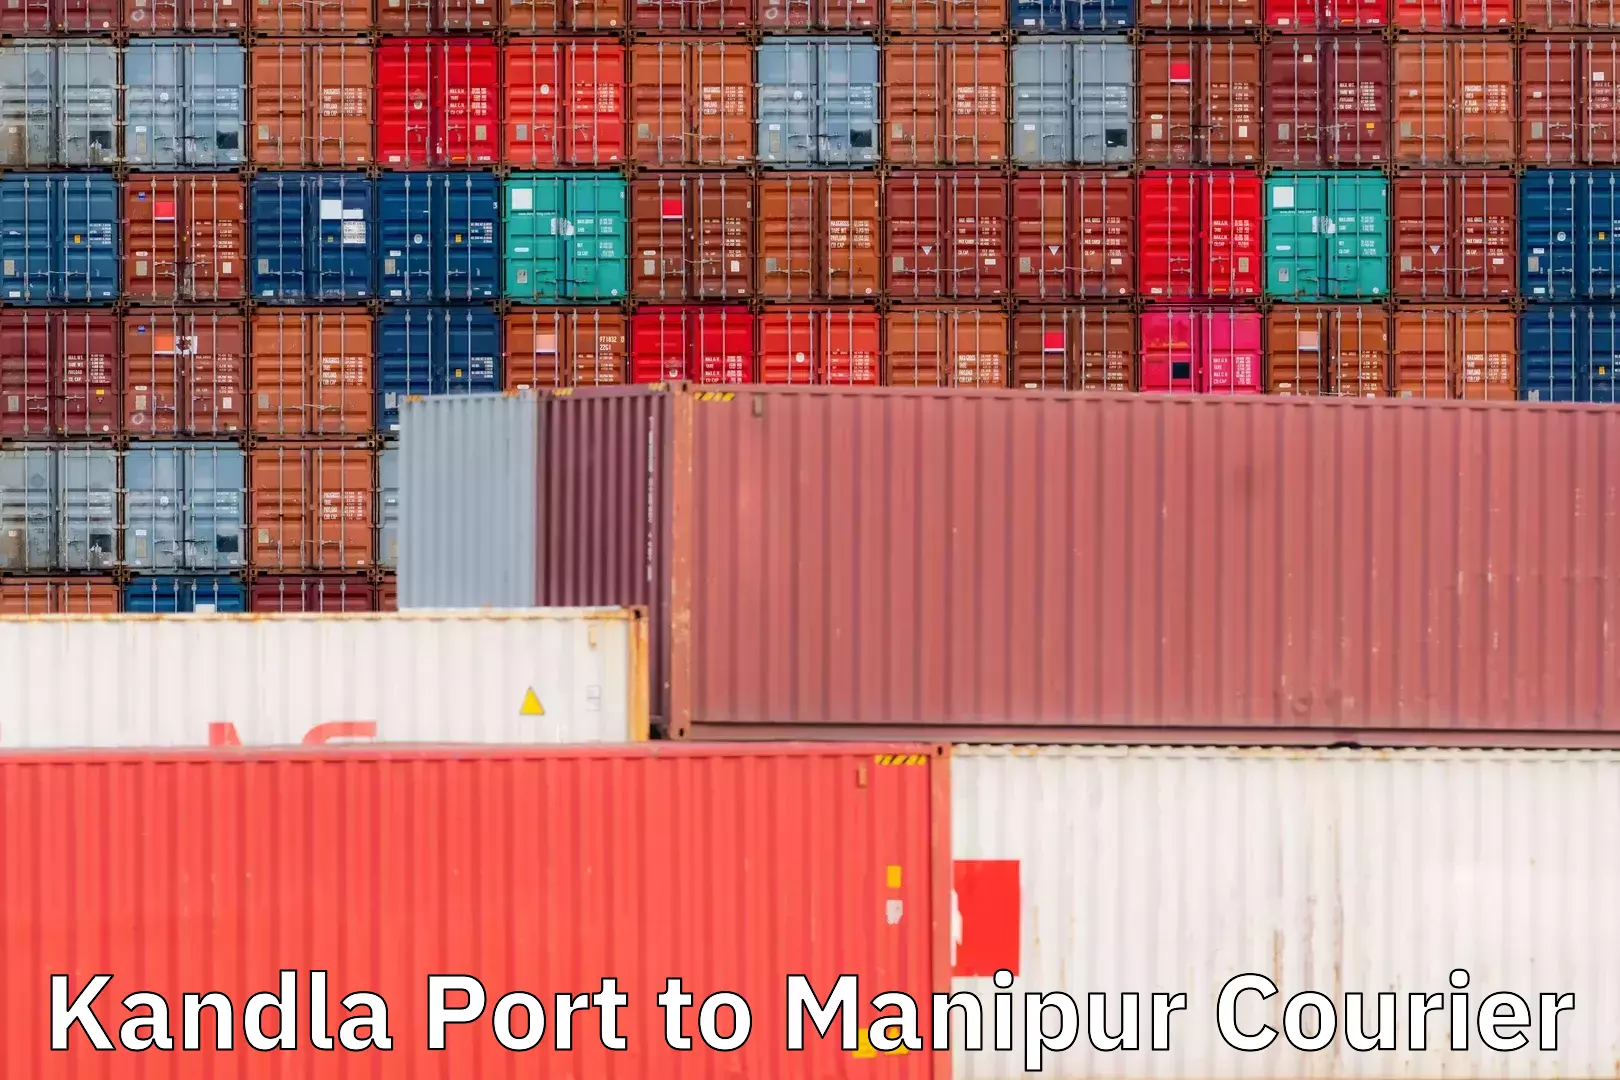 Online package tracking Kandla Port to Manipur